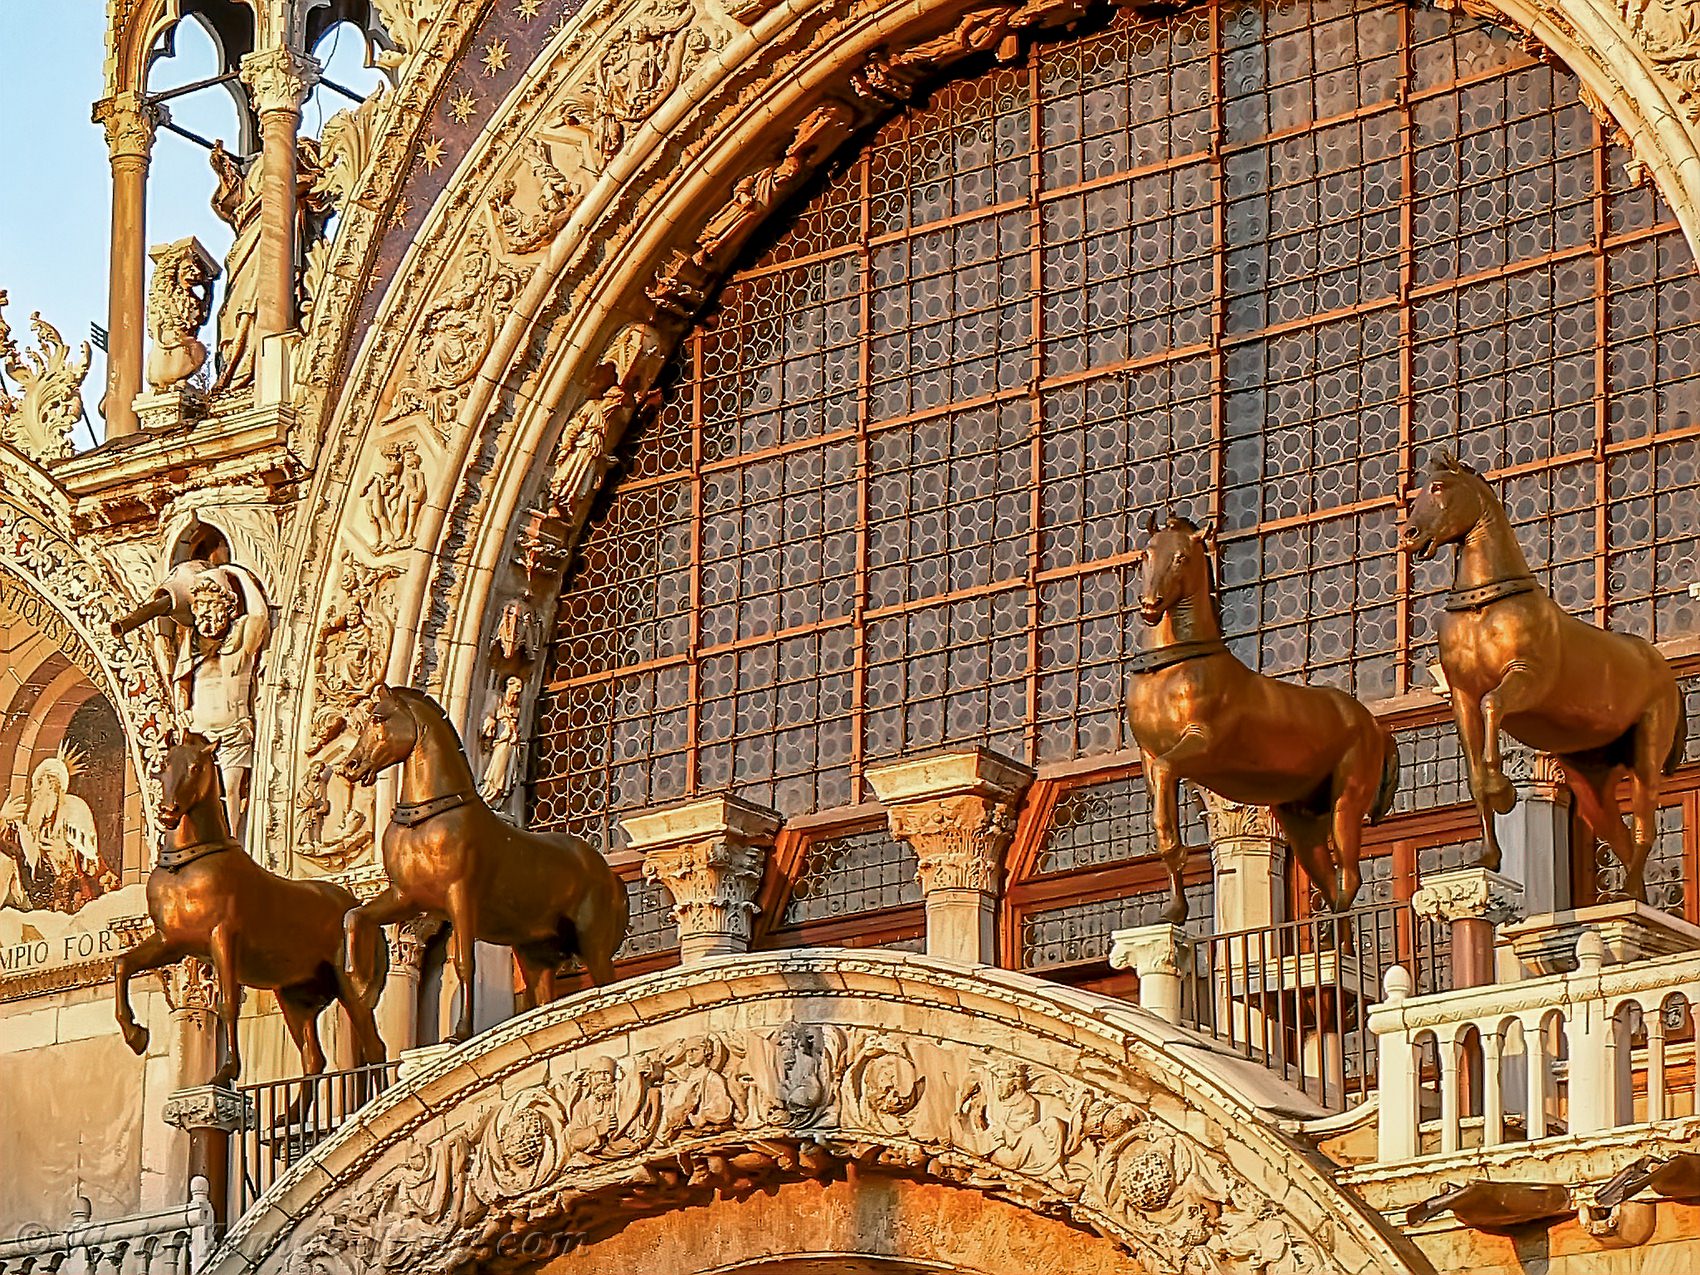 St. Mark Gold Basilica its Domes and Horses in Venice Italy